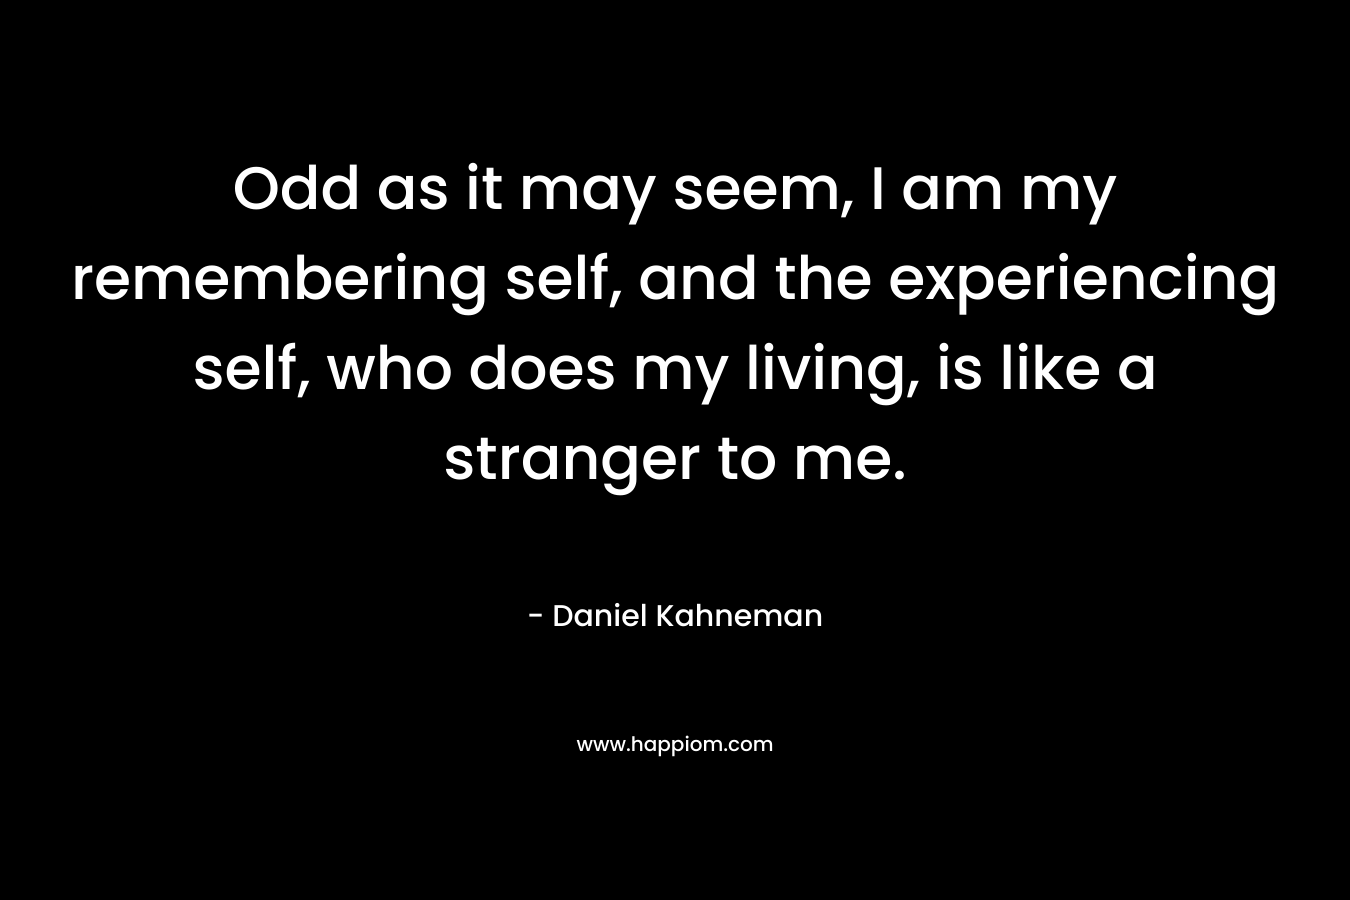 Odd as it may seem, I am my remembering self, and the experiencing self, who does my living, is like a stranger to me. – Daniel Kahneman